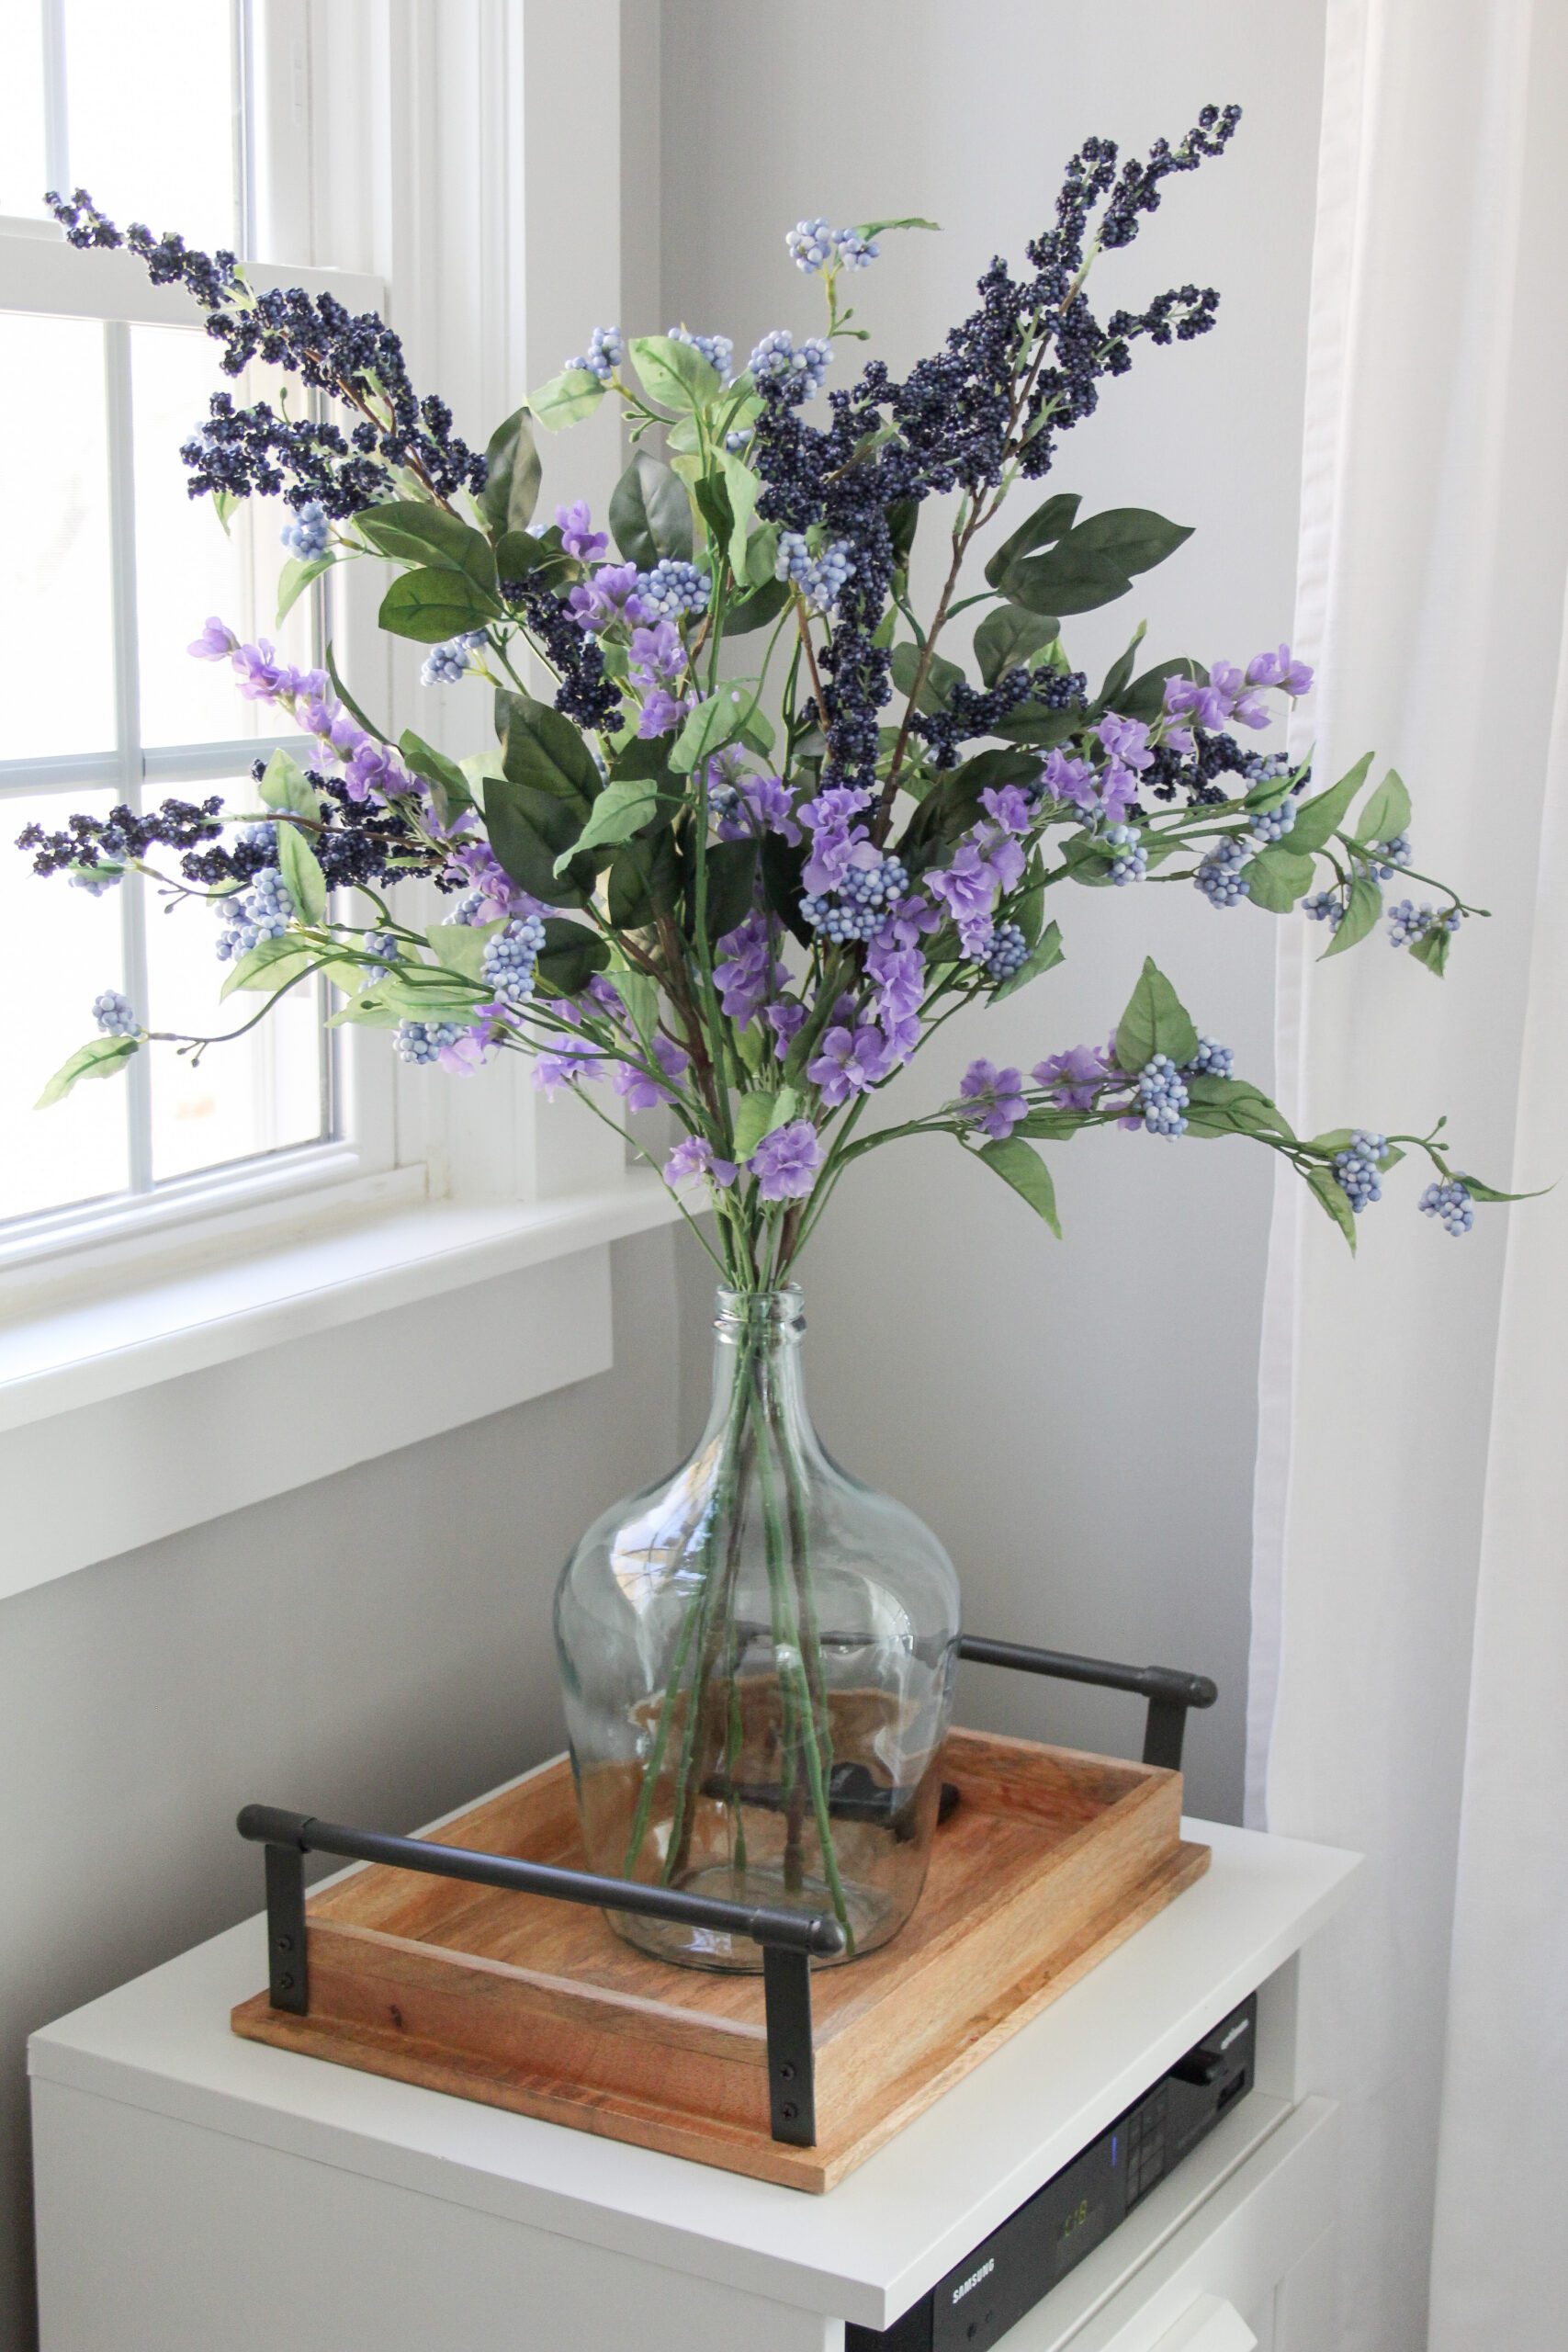 blueberry stems with purple delphinium in a glass demijohn